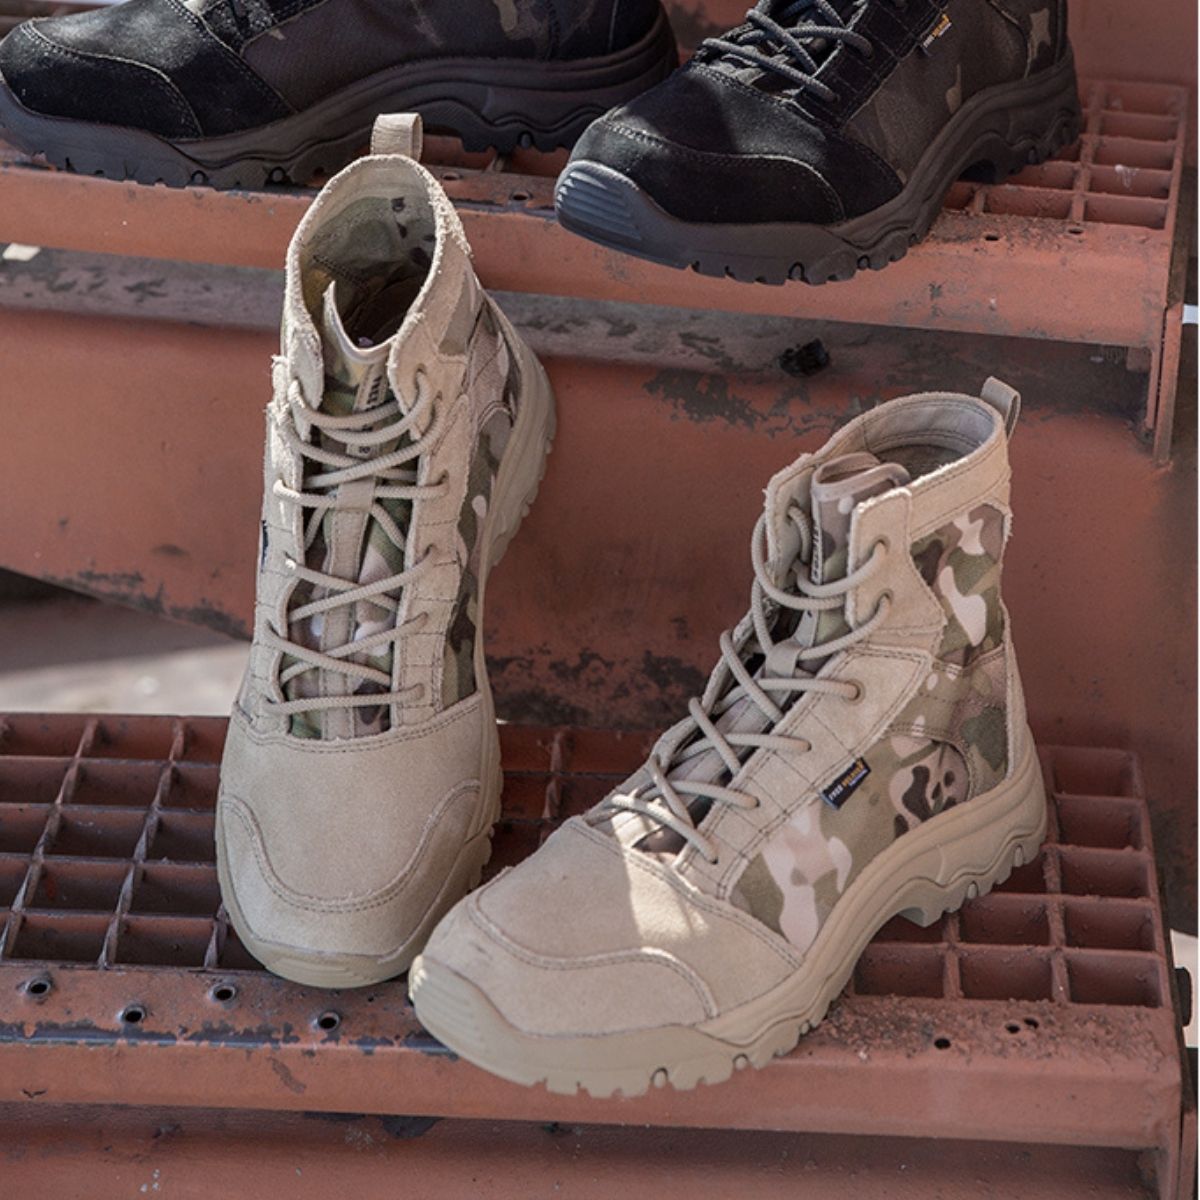 Professional Lightweight Tactical Boots